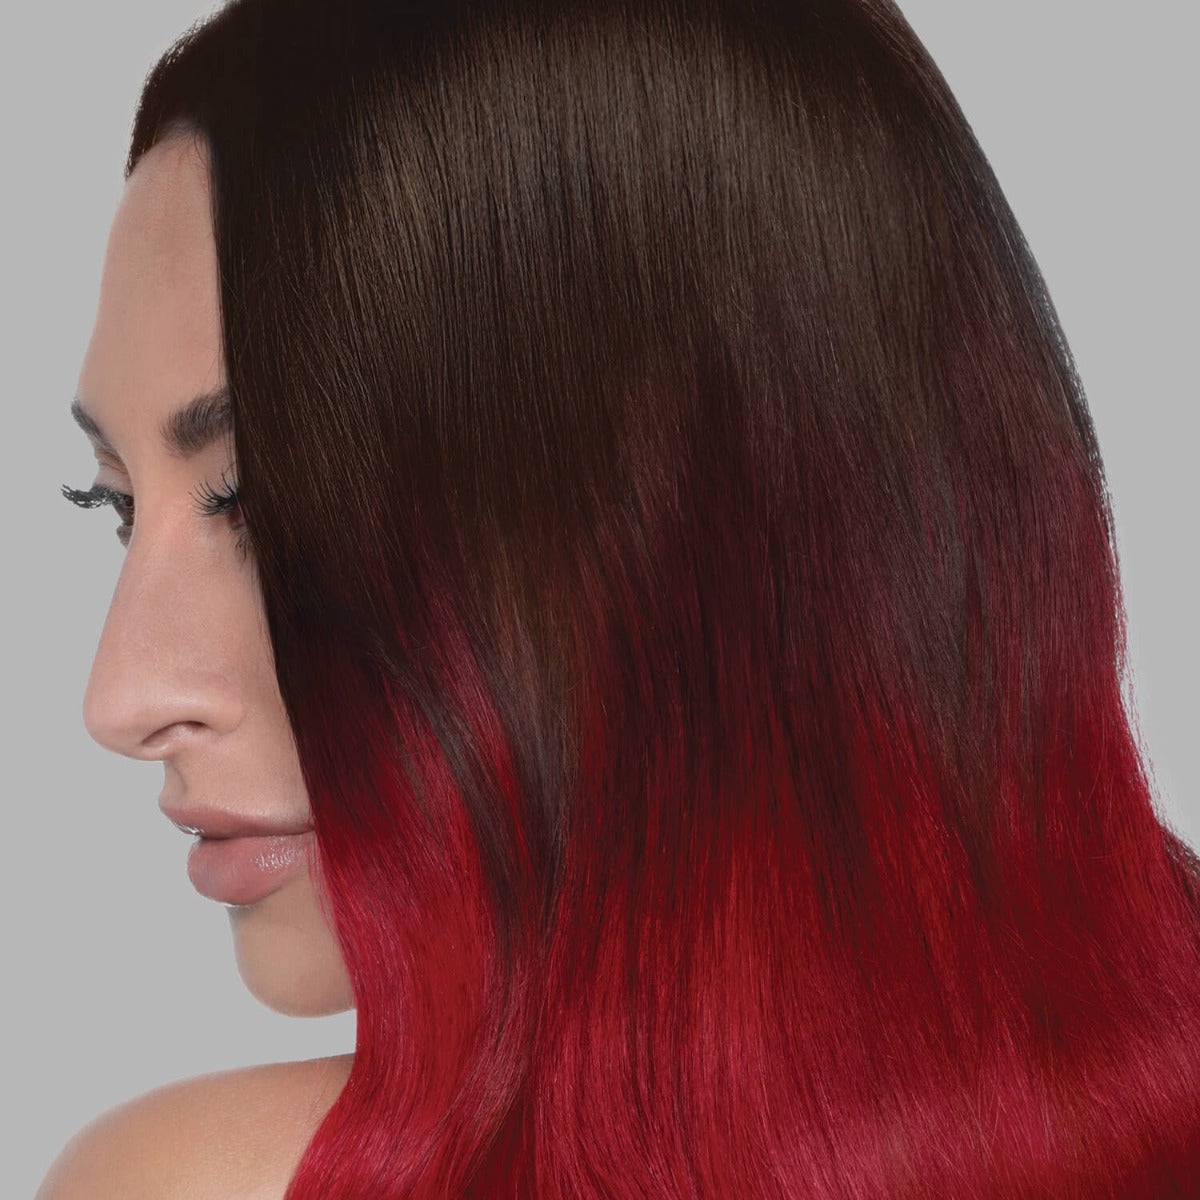 A photo of a model wearing Splat Hair Color's Strawberry Hair Dye